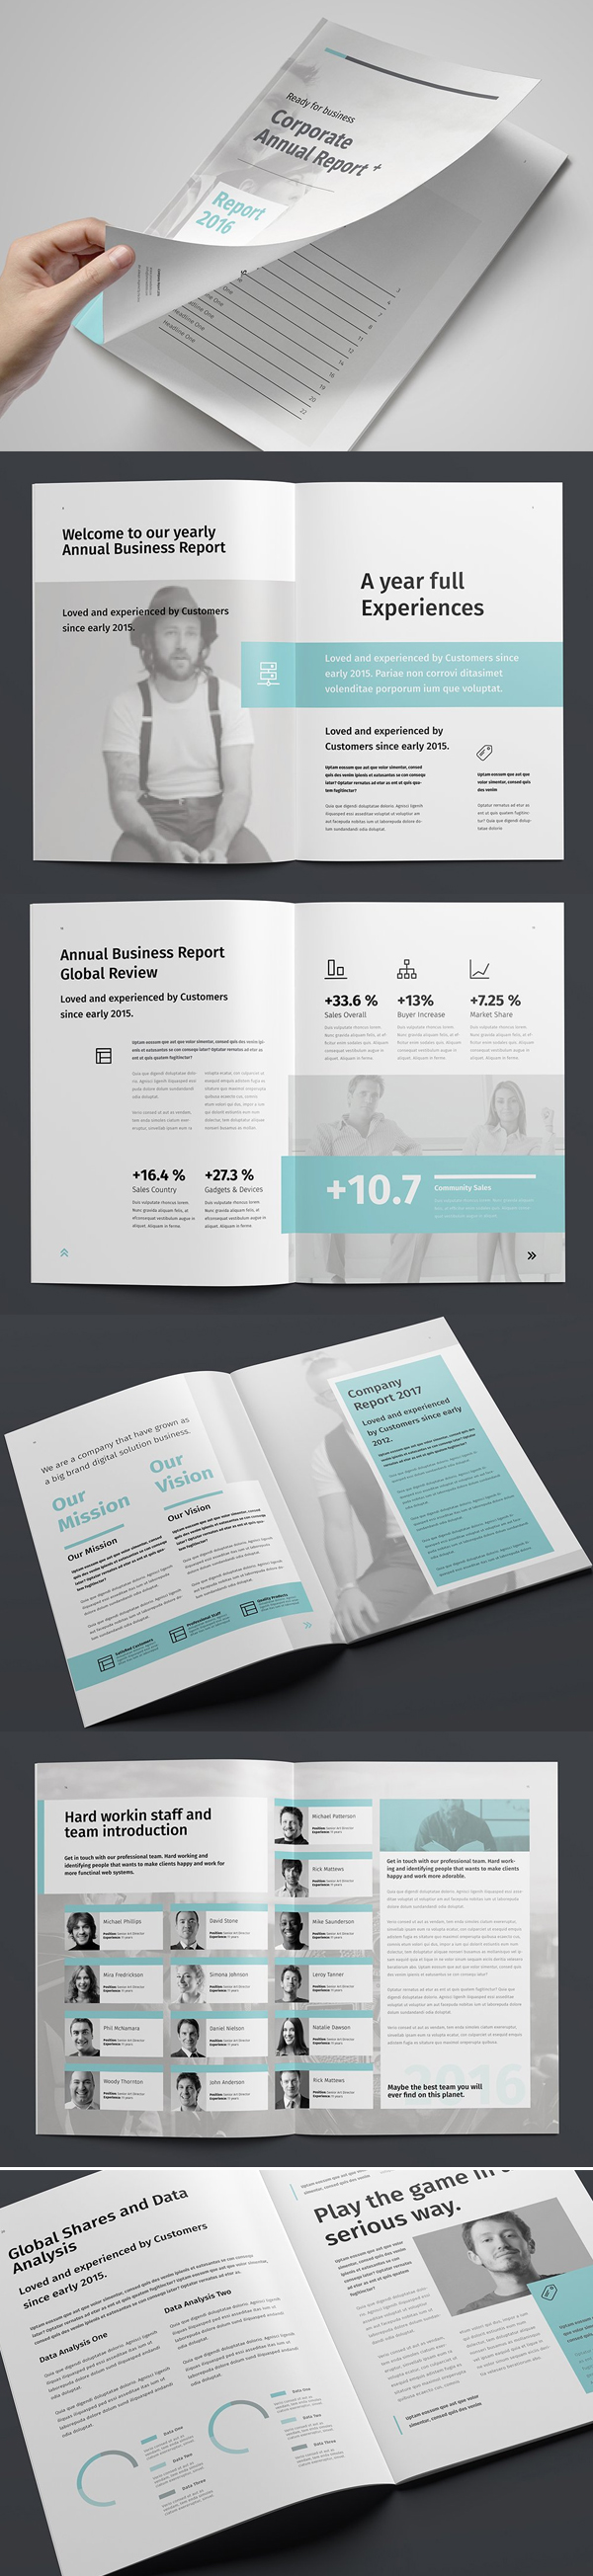 Company Brochure or Annual Report Template